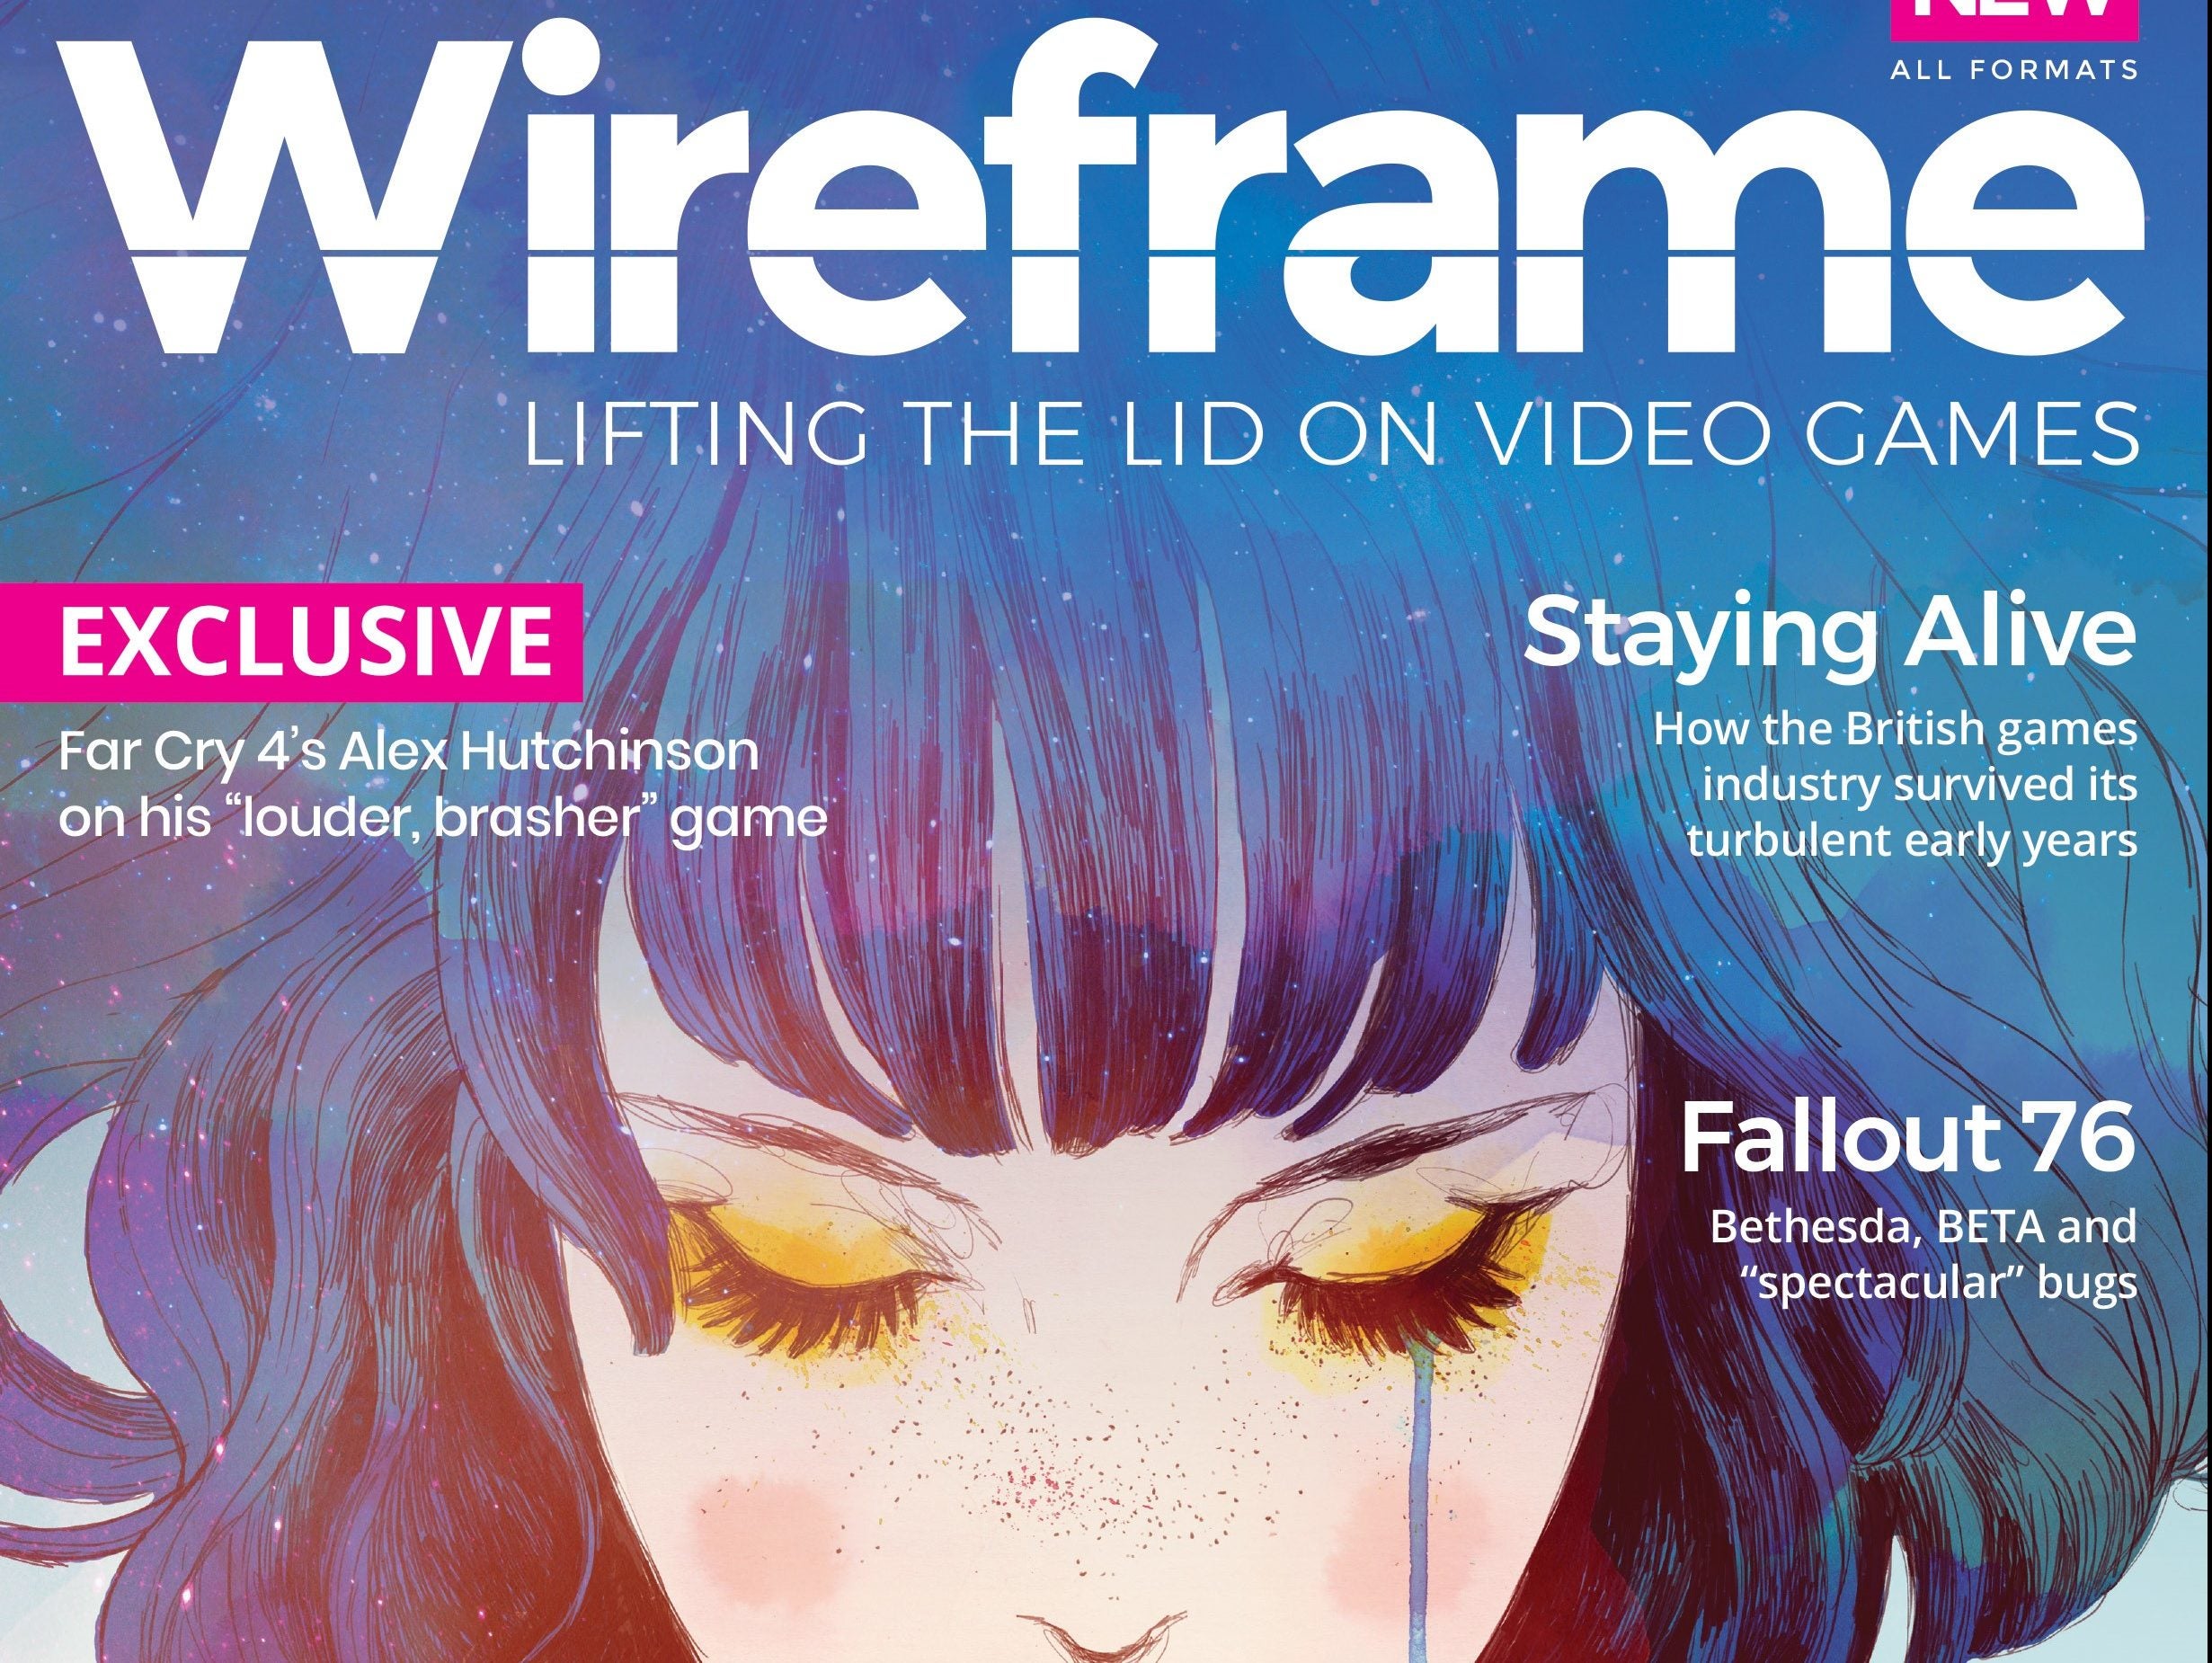 Computer manufacturer Raspberry Pi launches new video game magazine with 10,000 free copies